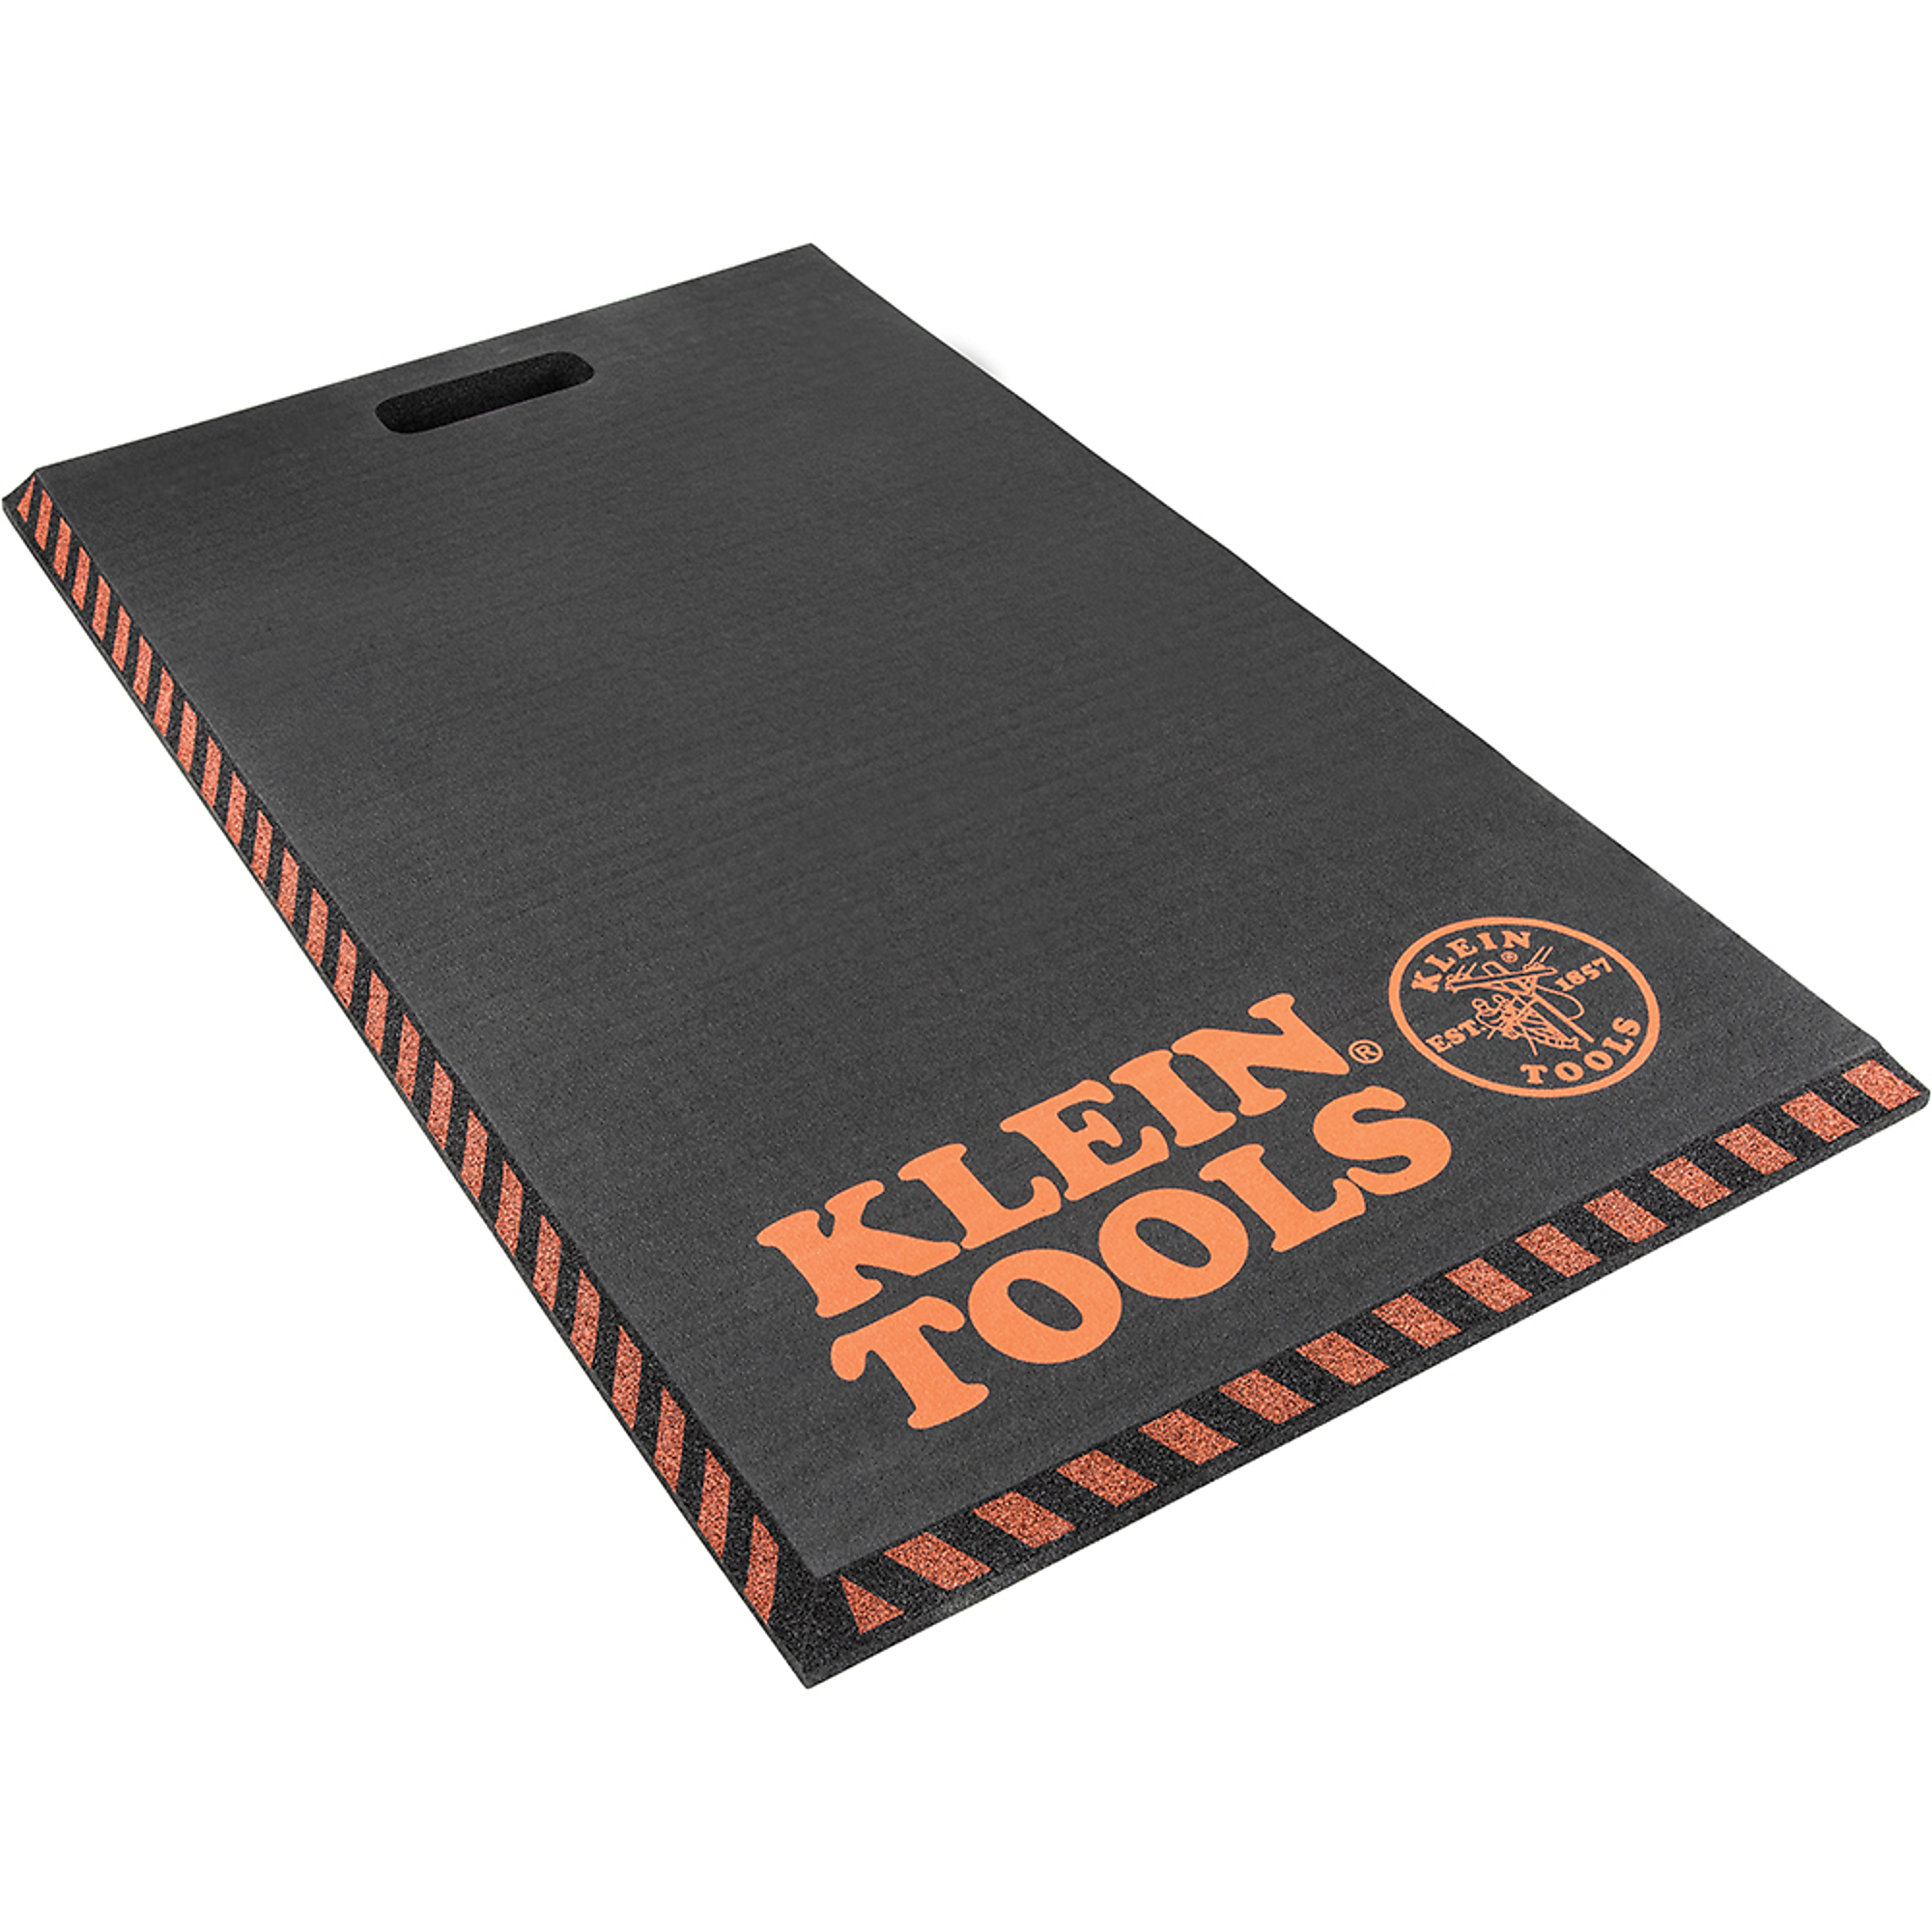 Klein Tools Tradesman Pro , Large Professional Kneeling Pads, Included (qty.) 1 Color Black, Model 60136